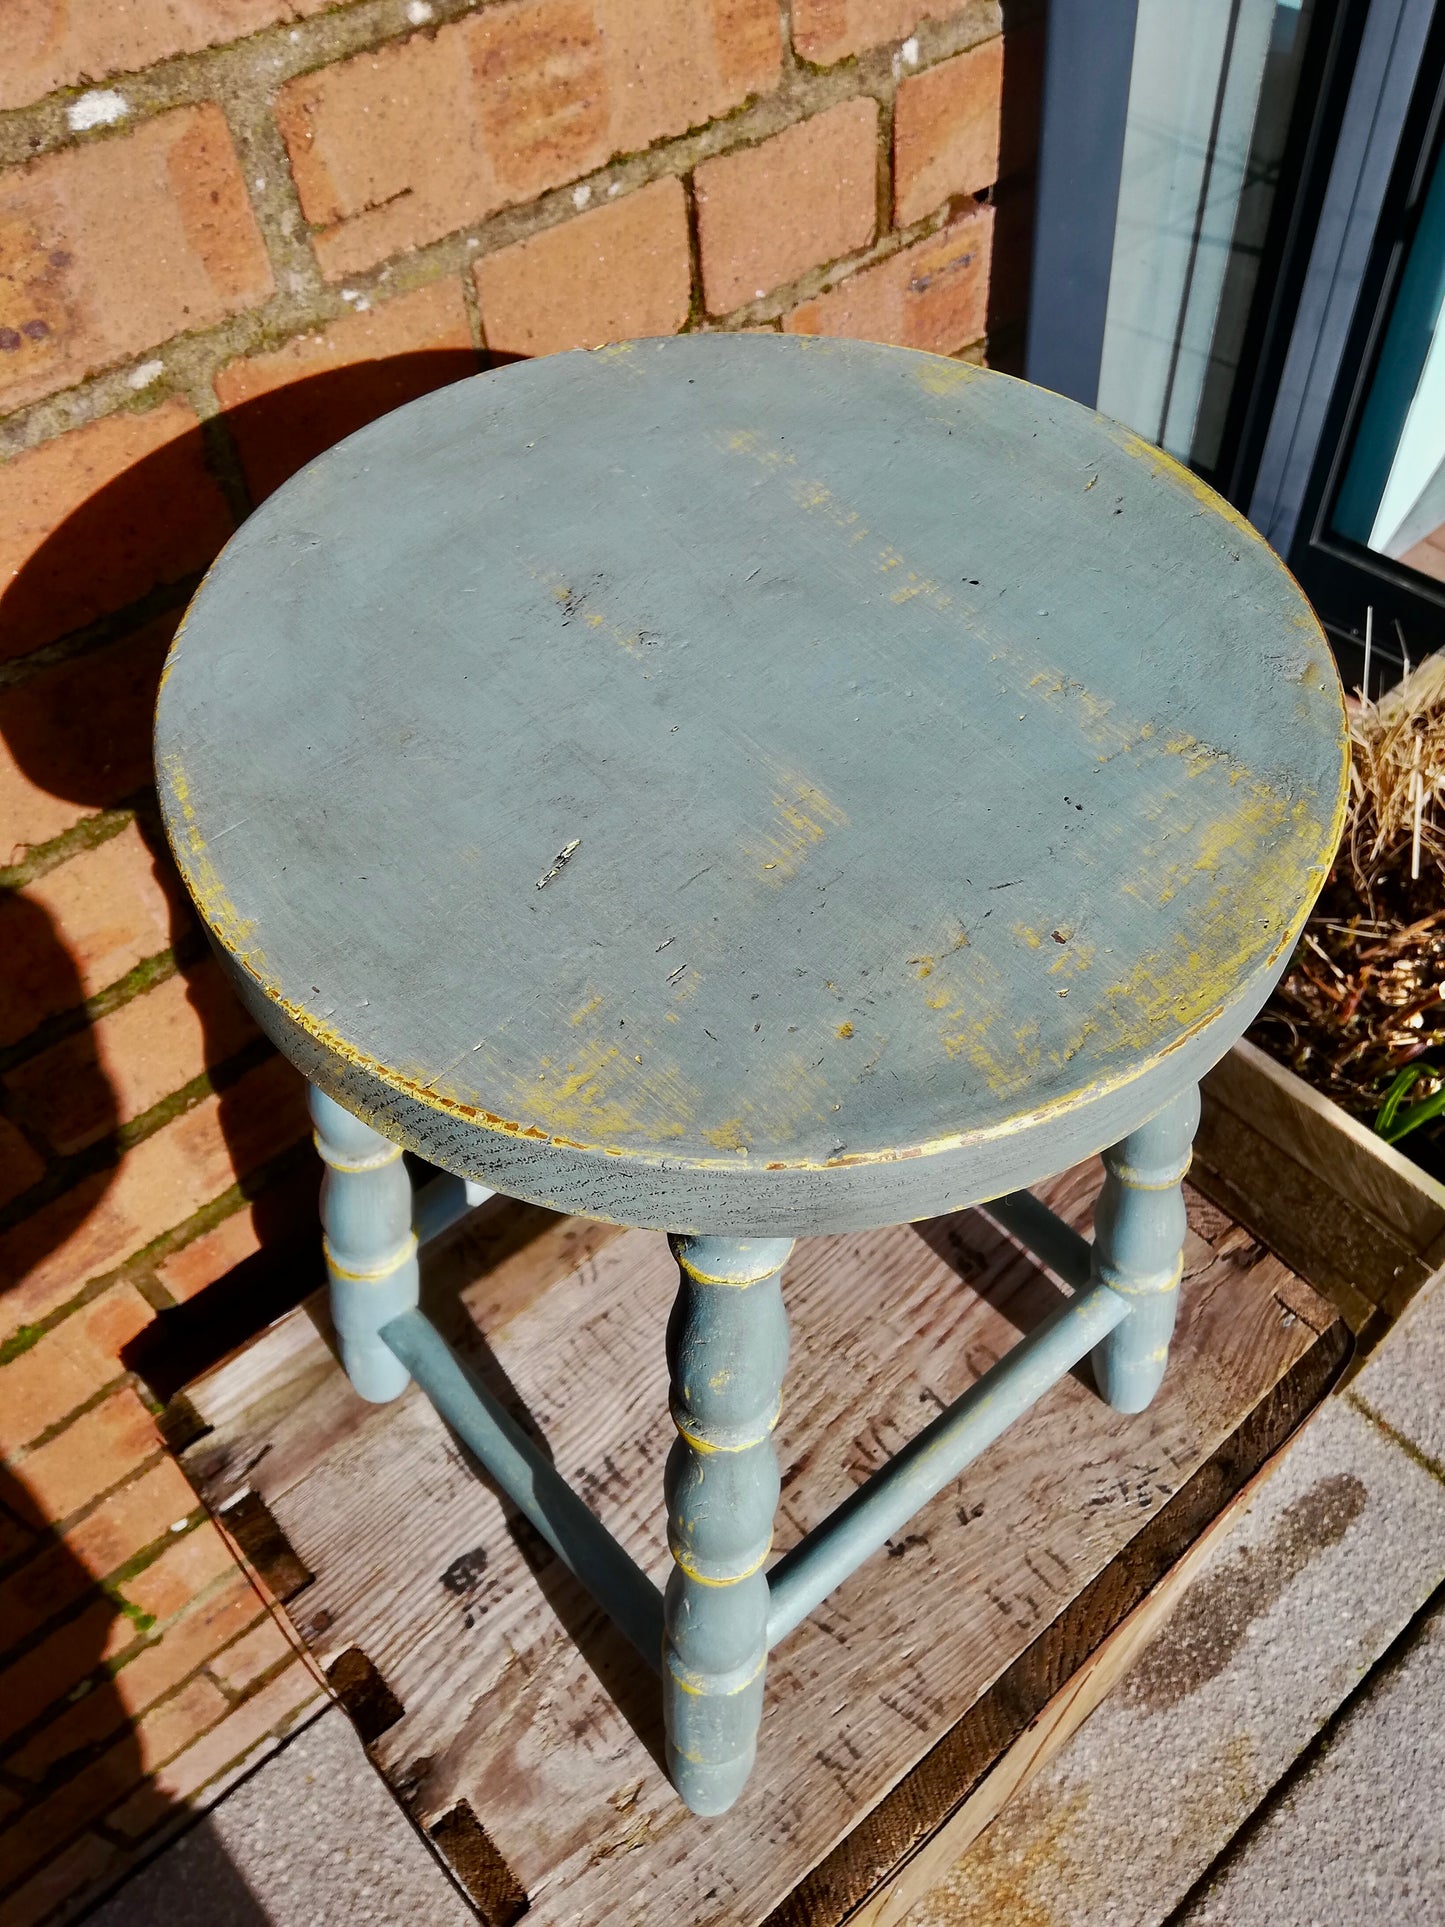 Vintage wooden stool painted in layers of chippy yellow and blue paint